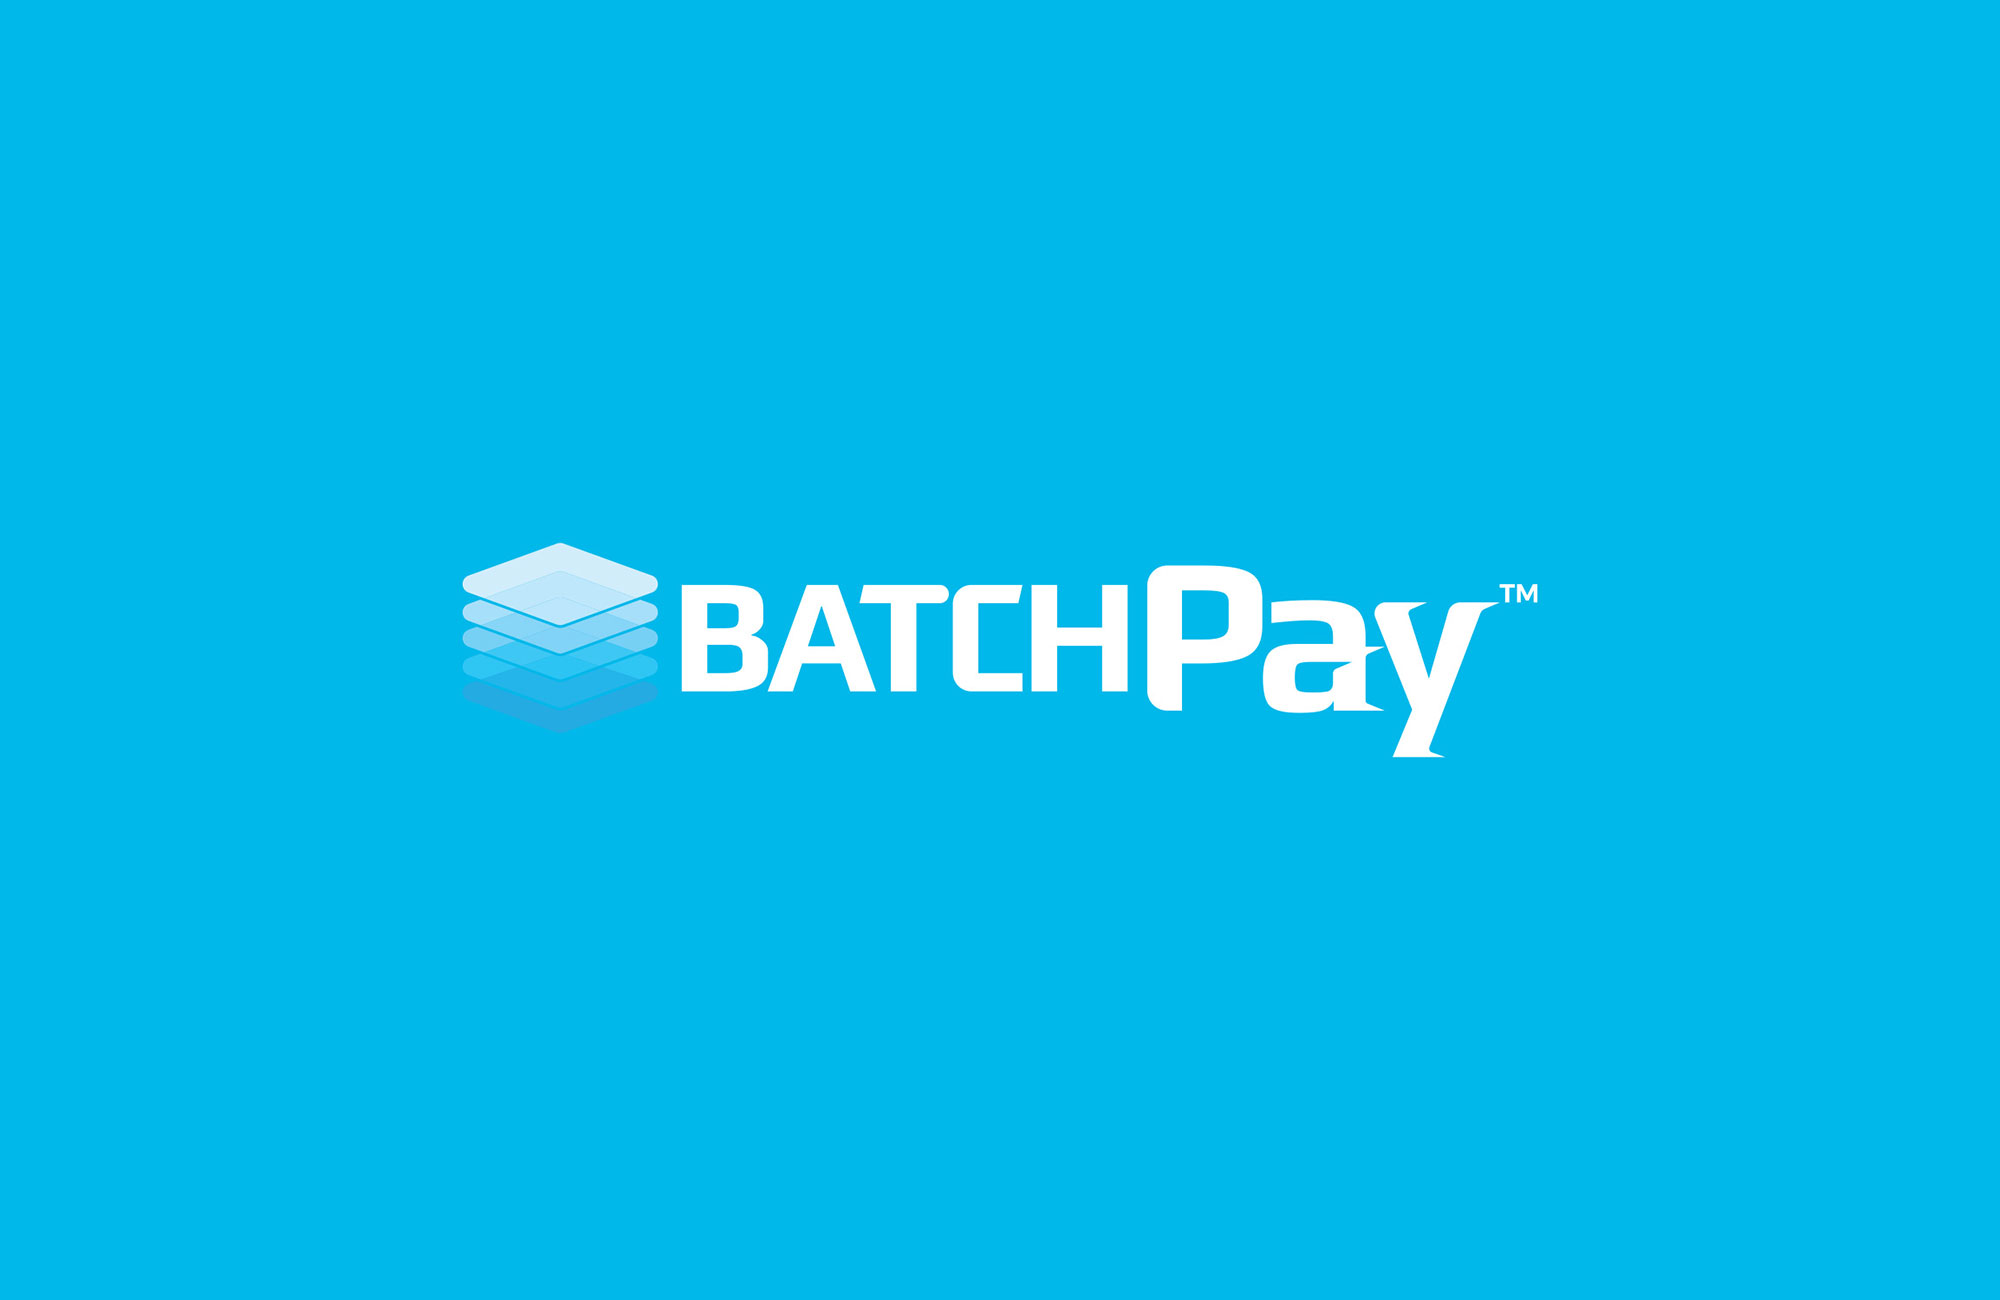 BatchPay